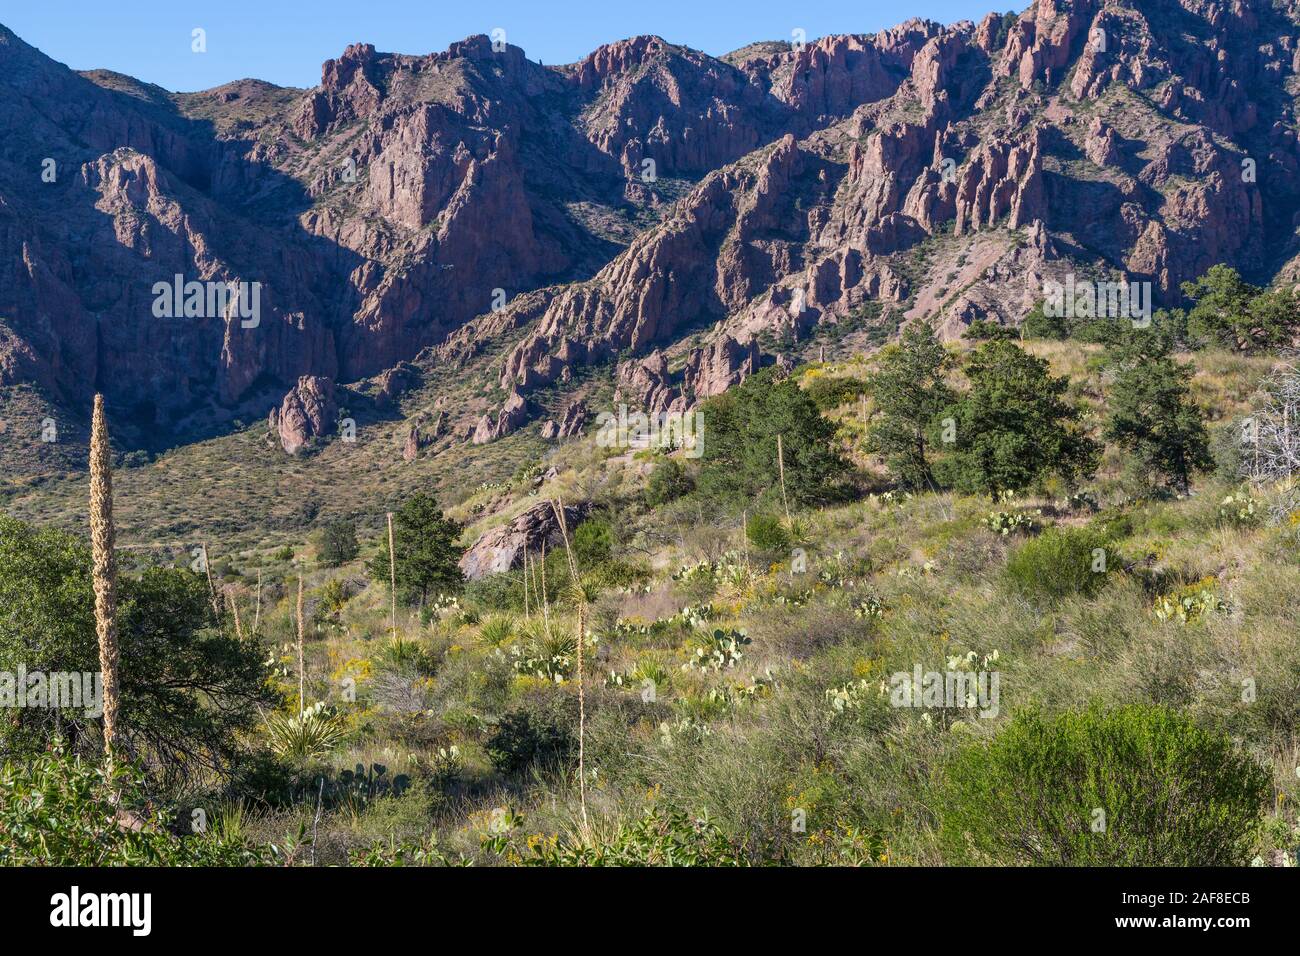 Big Bend National Park, Texas. Chisos Mountaion Scenery, Sotol (Desert Spoon) and Pricklypear Cactus Growing in Foreground. Stock Photo